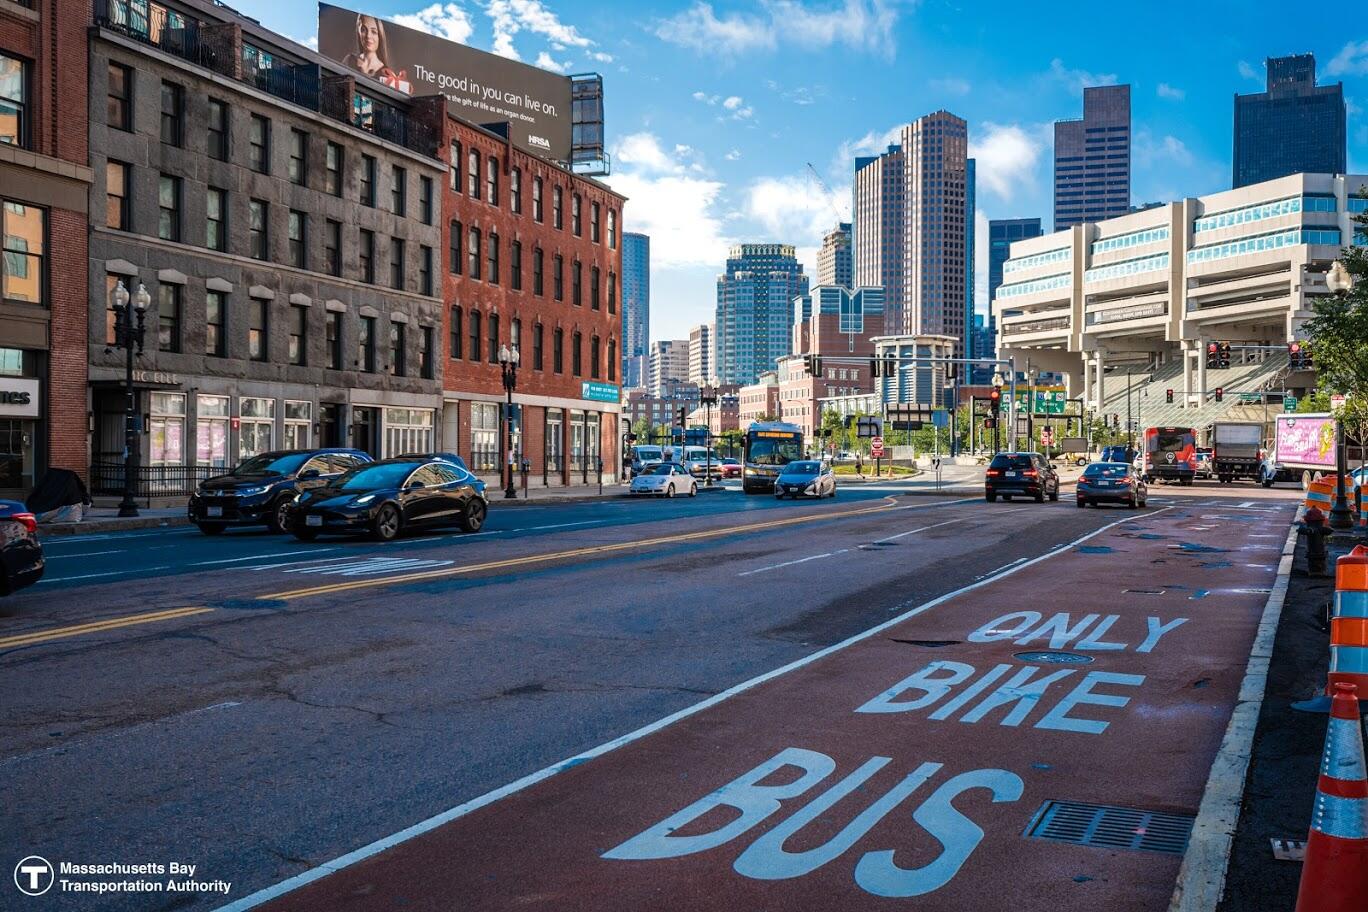 View of the shared bus/bike lane in Government Center Boston.